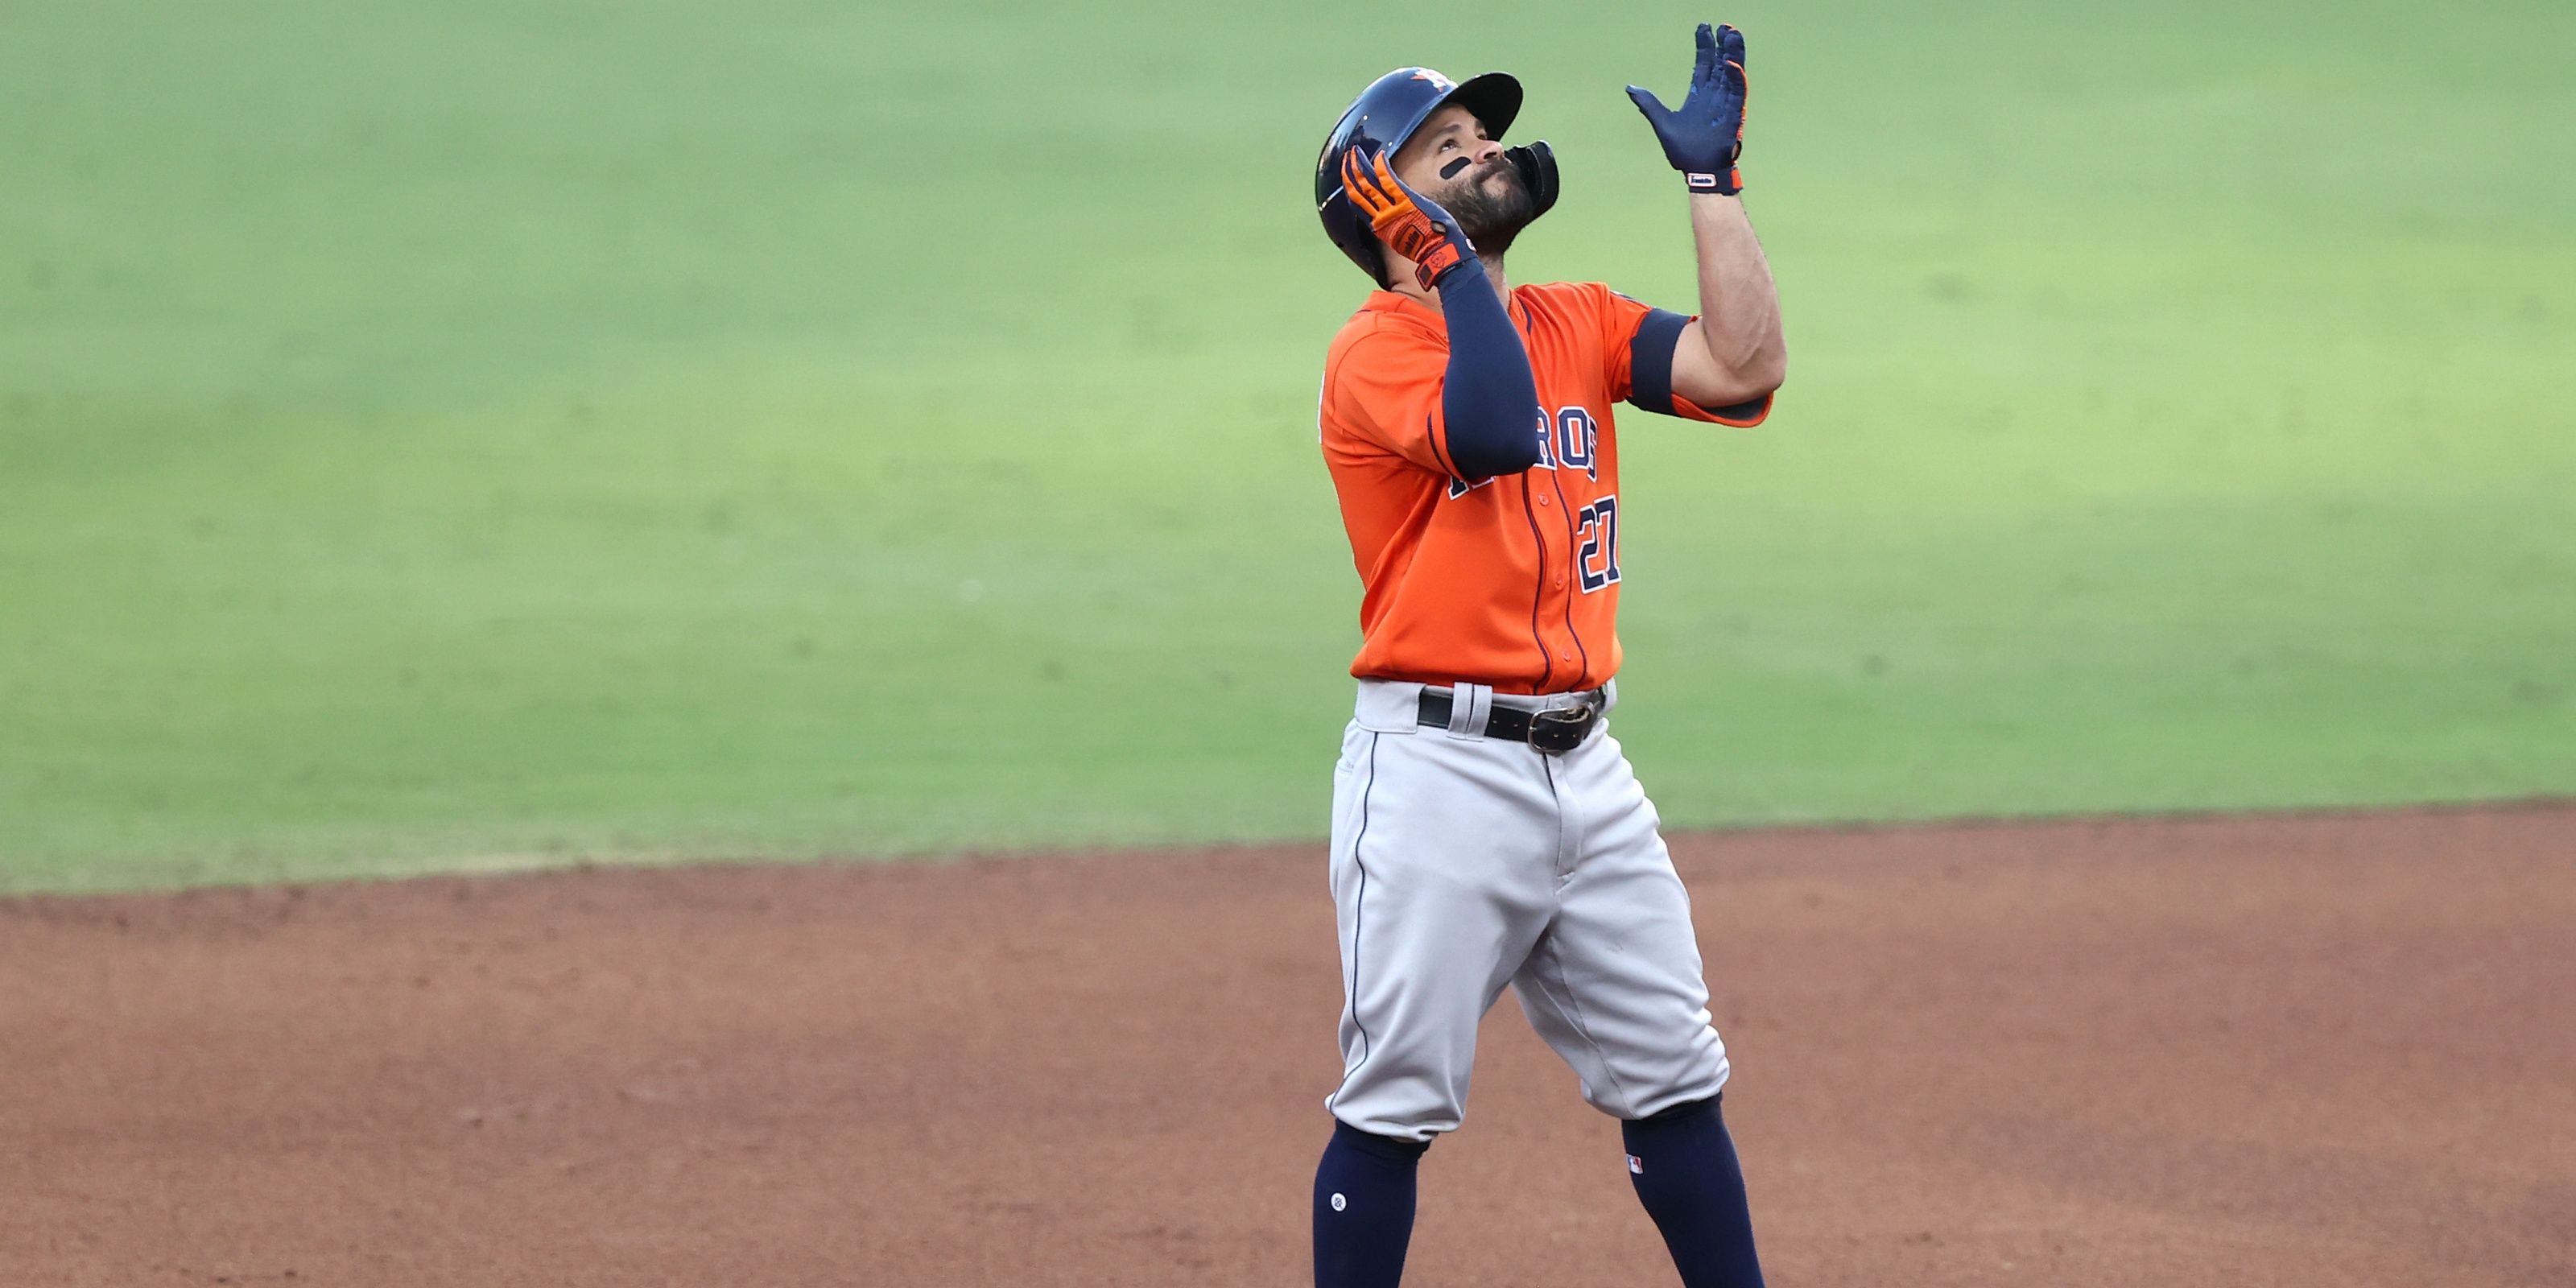 jose altuve clapping after hitting a double